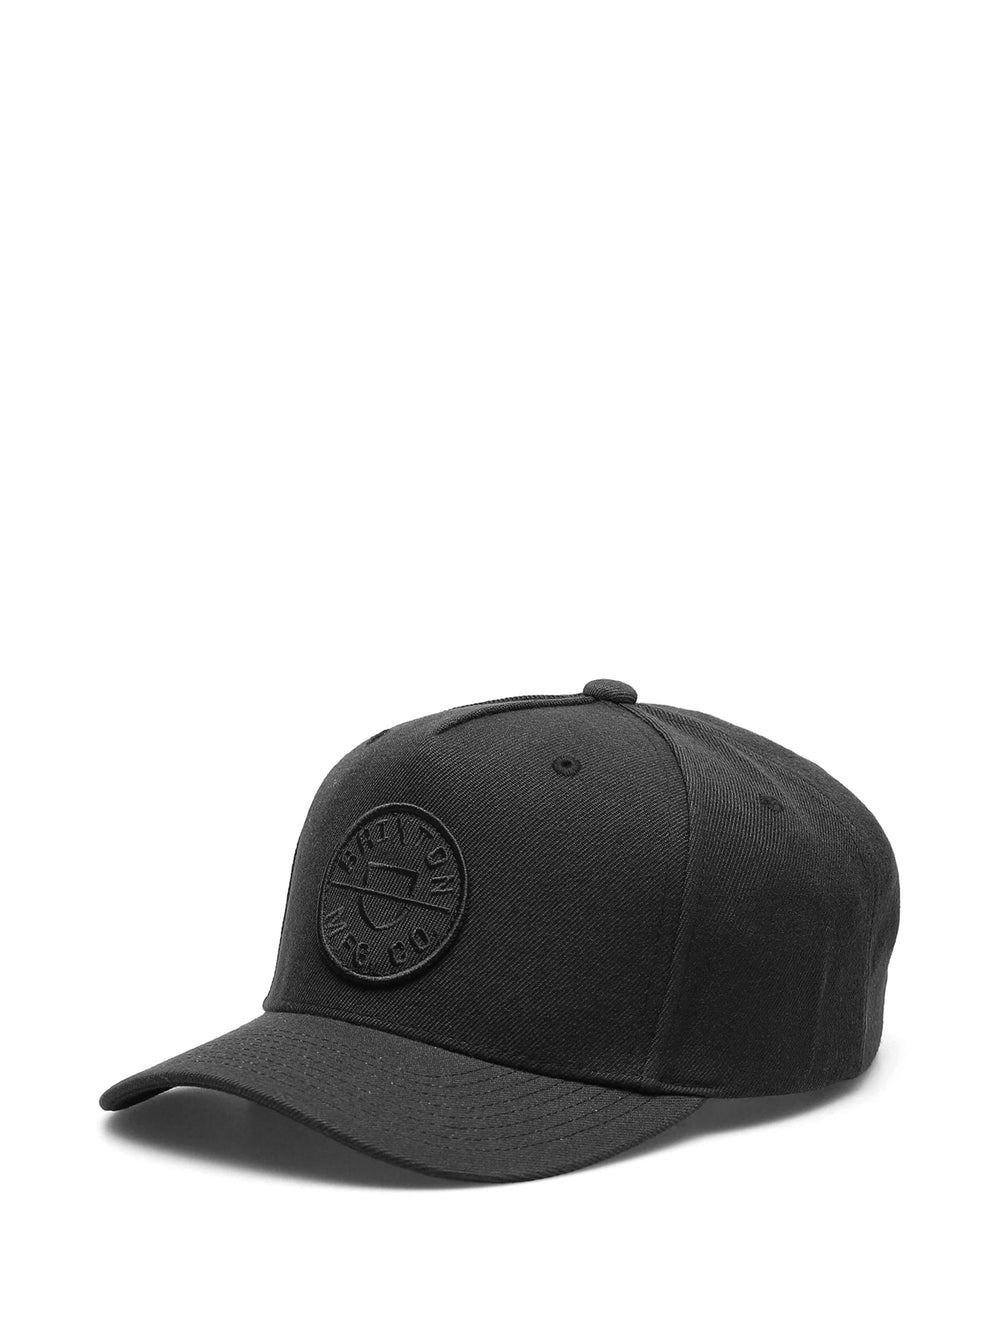 BRIXTON CREST CROSSOVER MP HAT - BLACK - CLEARANCE